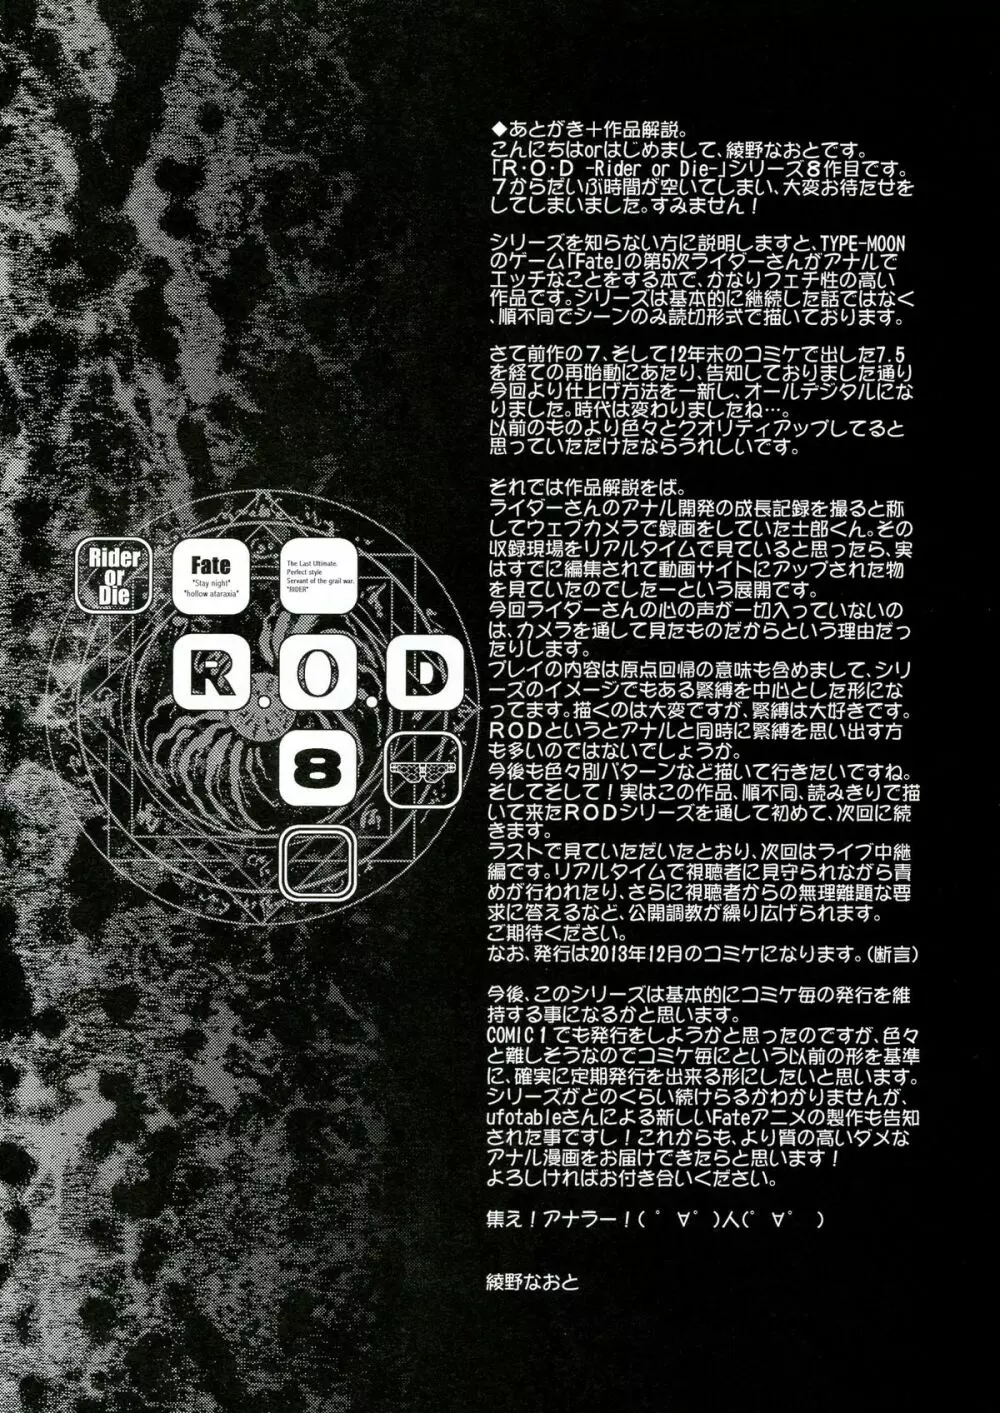 R.O.D 8 -Rider or Die 8- Page.28